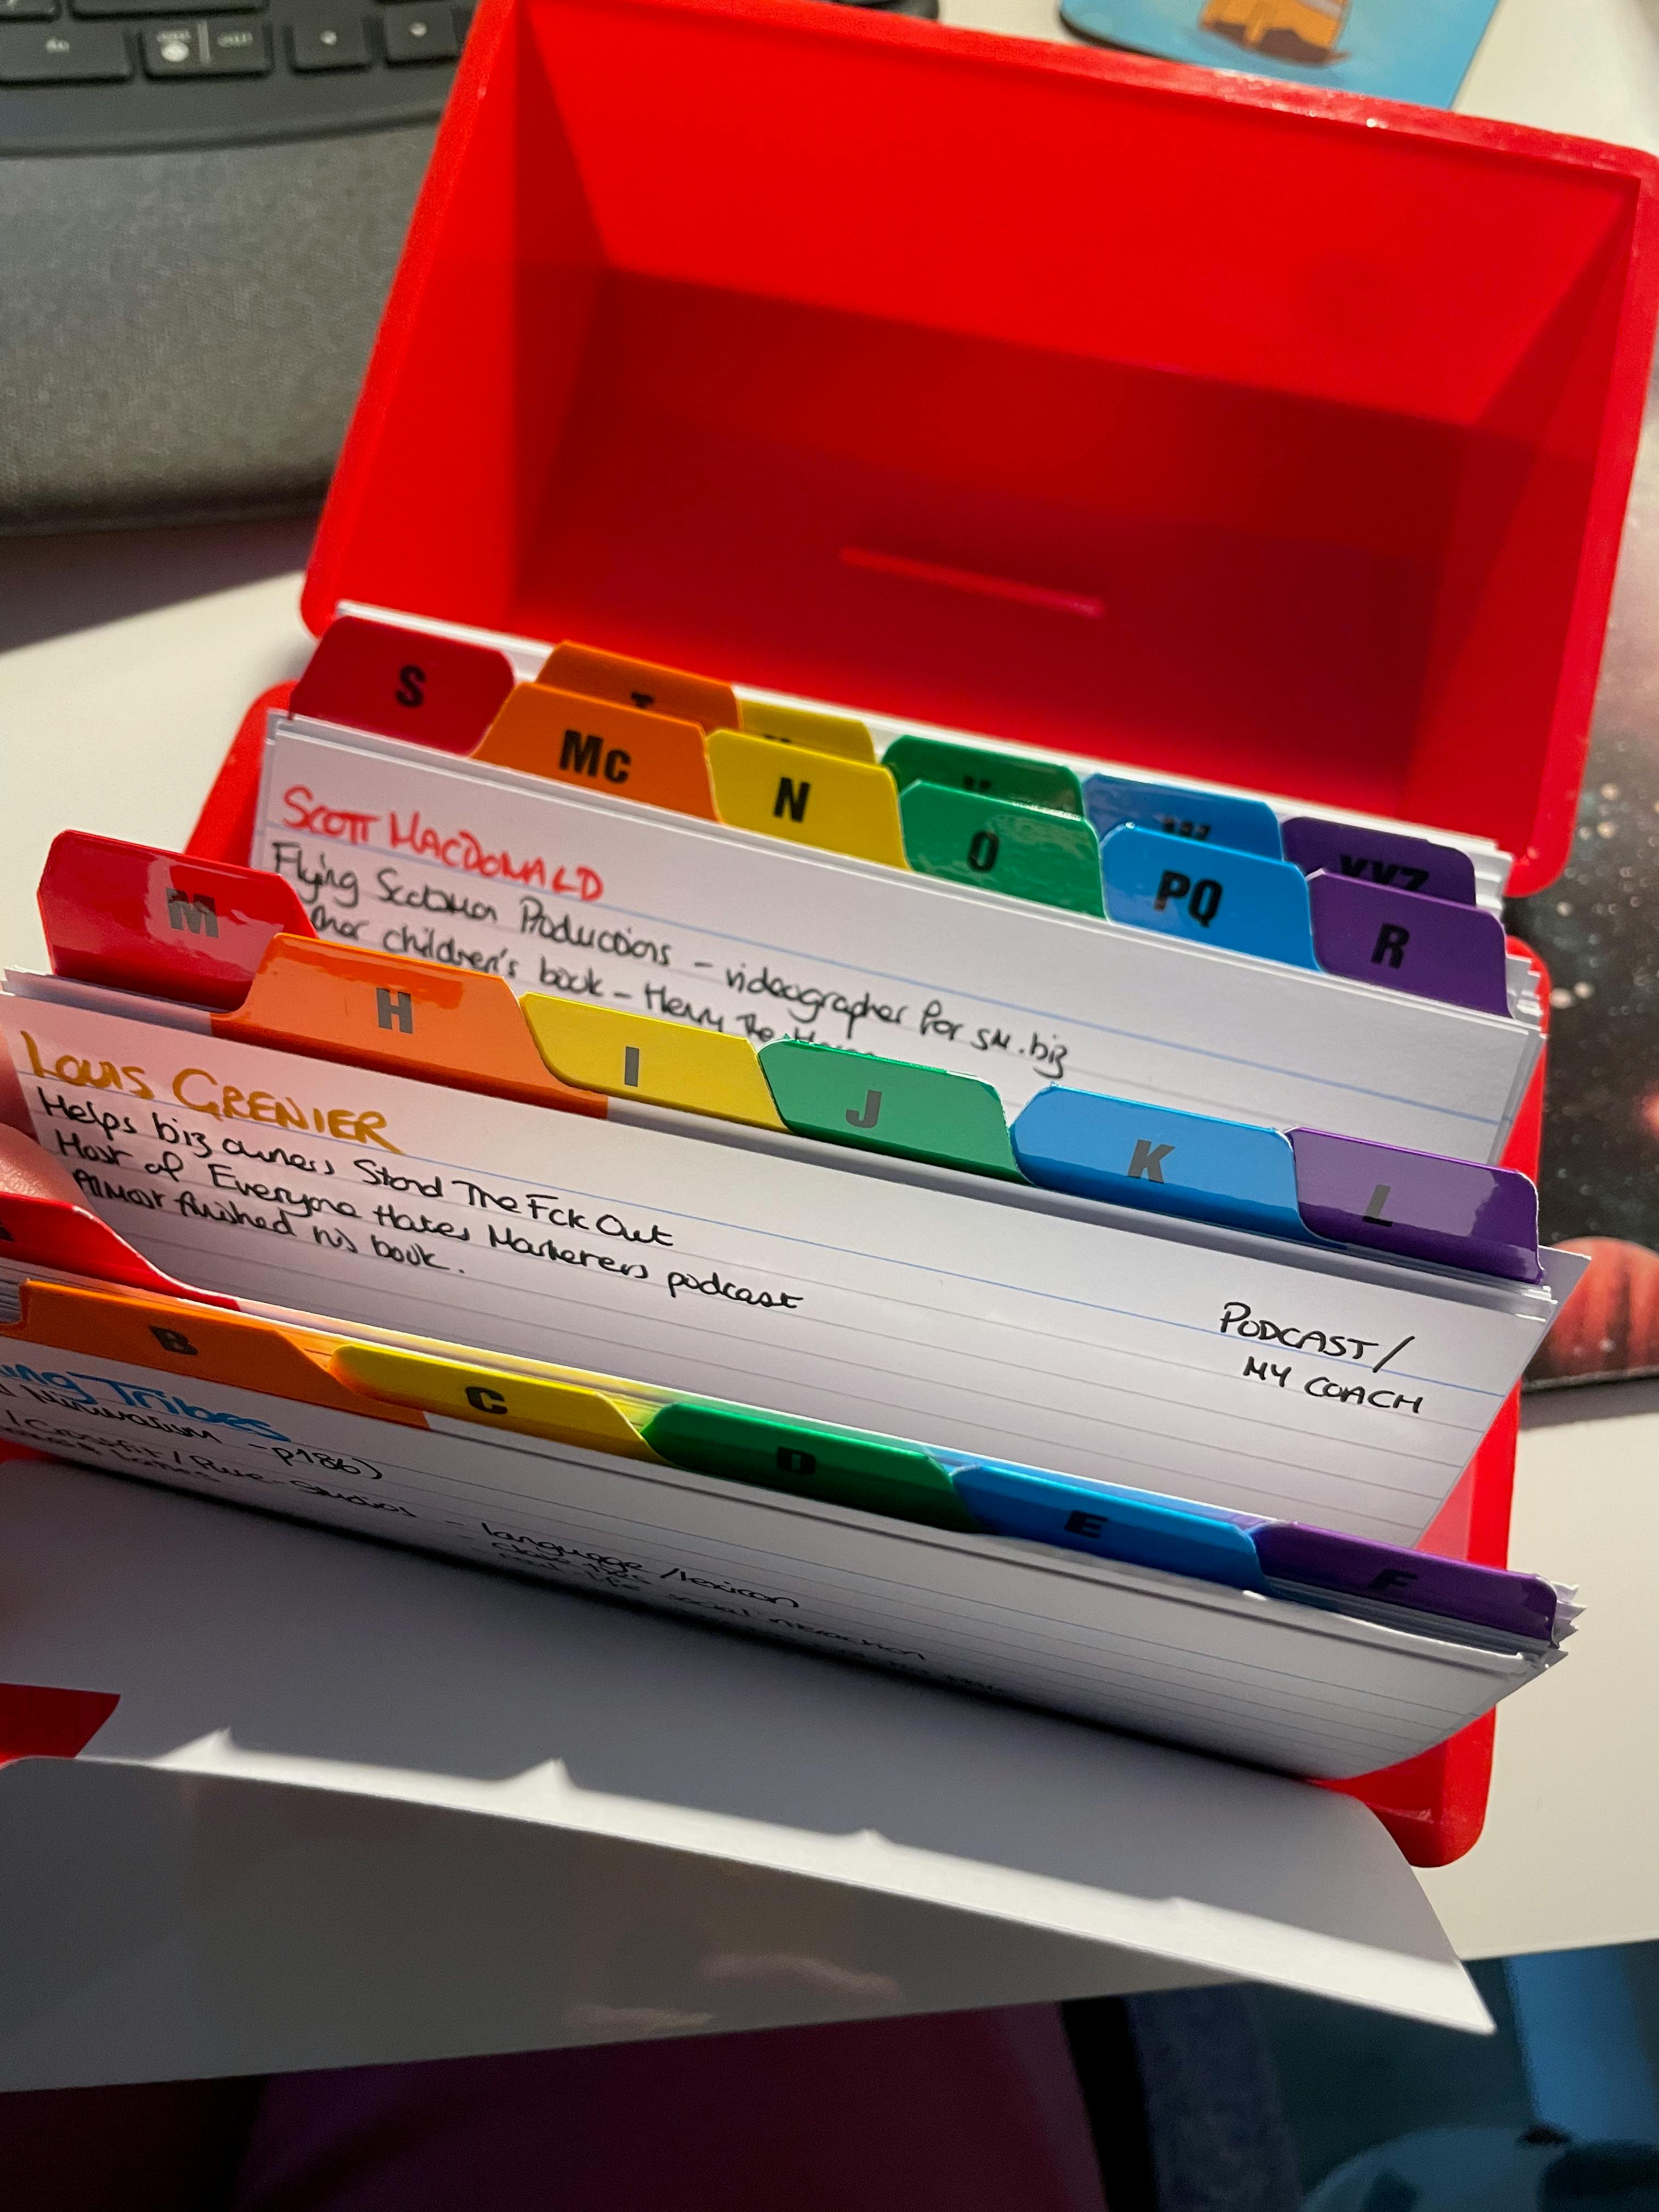 Red index card box open to show alphabet dividers and snippets of 2 cards — Stuart MacDonald and Louis Grenier